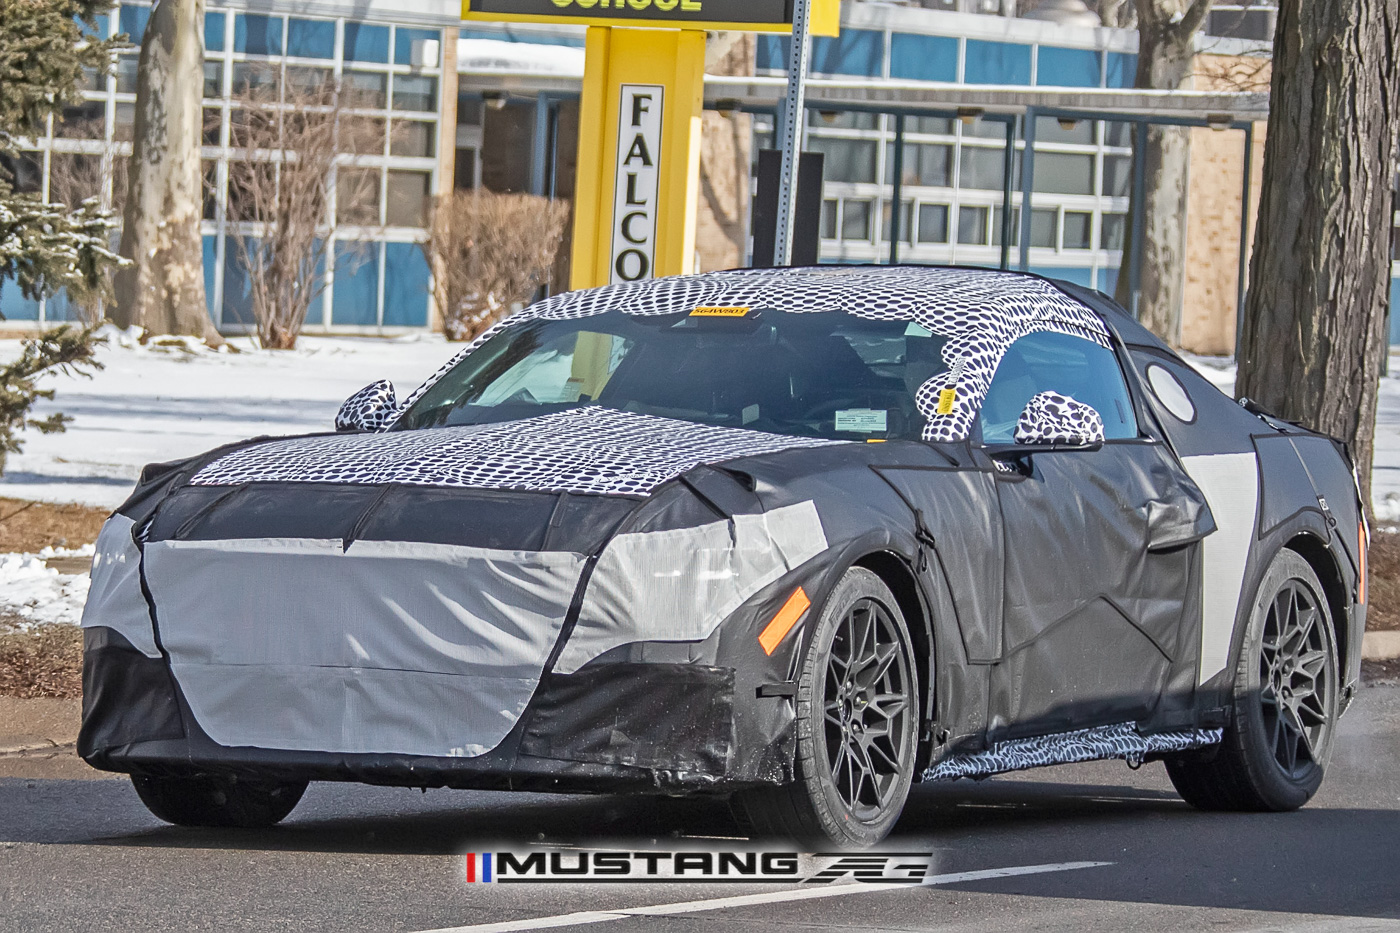 S650 Mustang Spied: New Mustang Prototype w/ Mach 1-Style Wheels, Upgraded Dual Caliper Rear Brakes 📸 s650-mustang-new-mach1-prototype-spied-2-jpg-